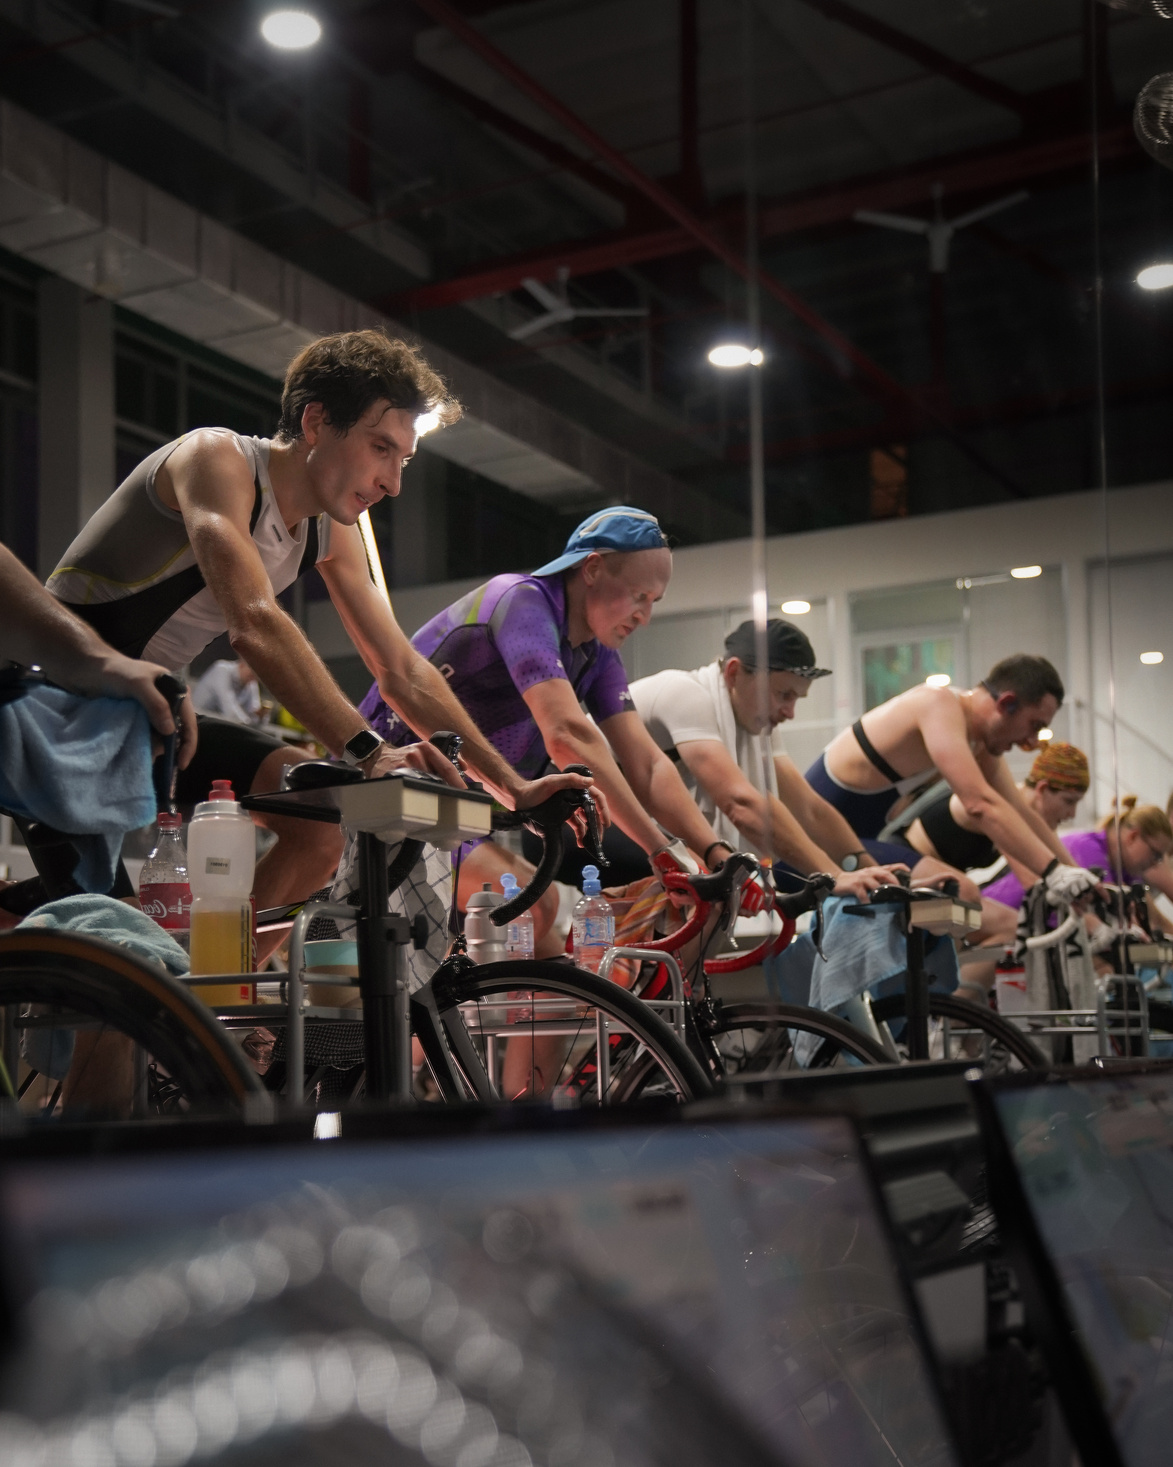 People on Bikes Cycling Together in Gym